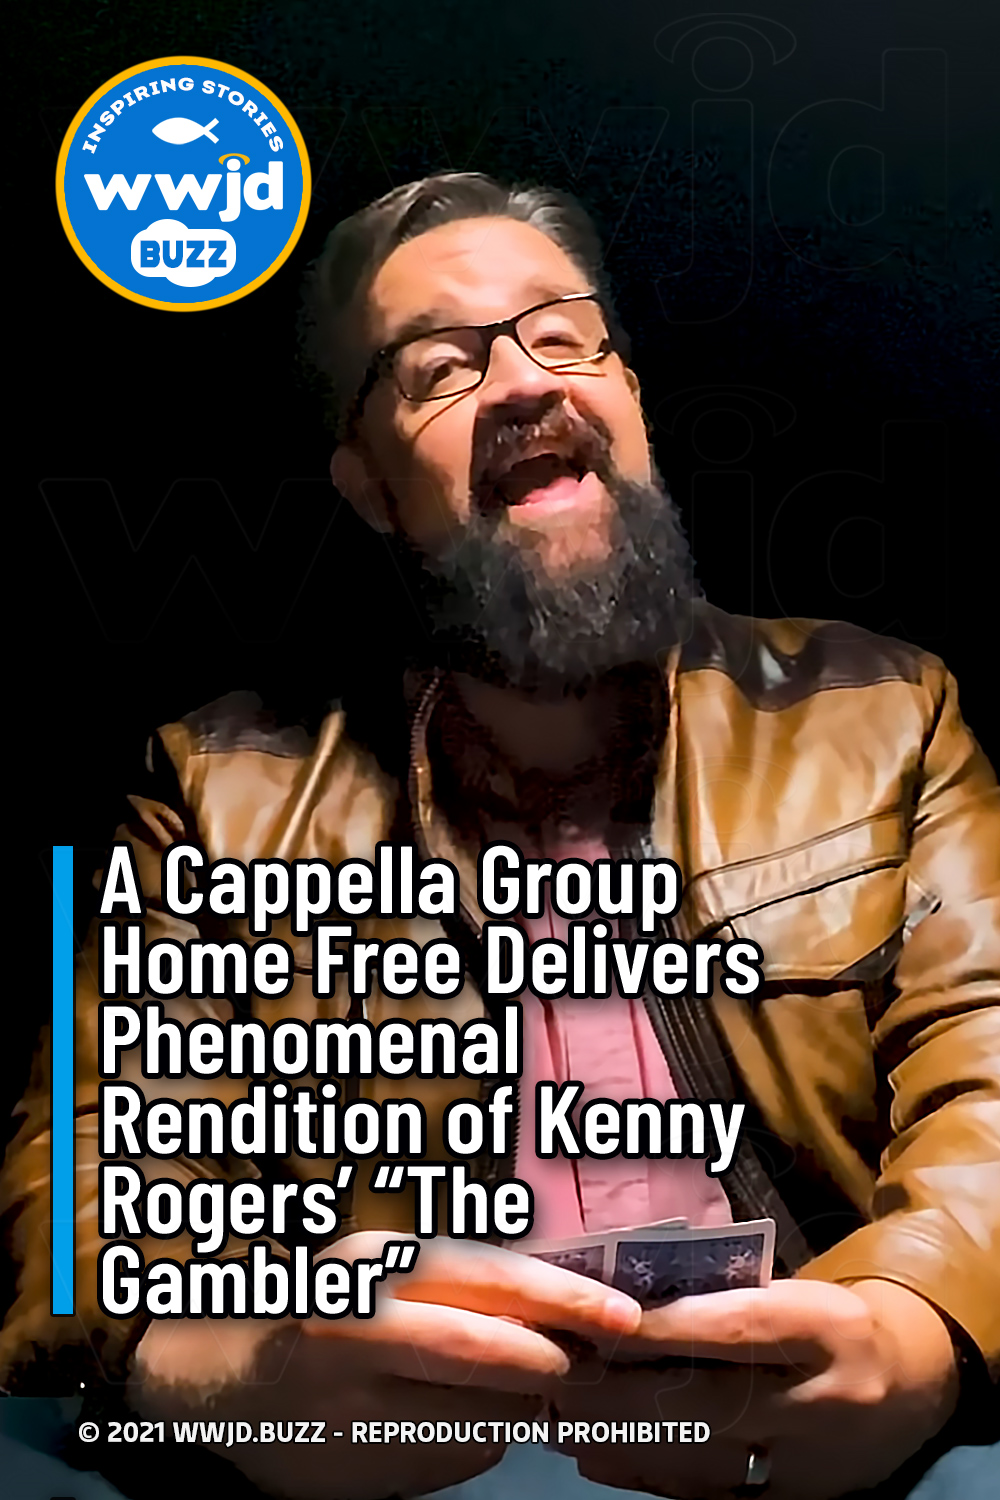 A Cappella Group Home Free Delivers Phenomenal Rendition of Kenny Rogers’ “The Gambler”